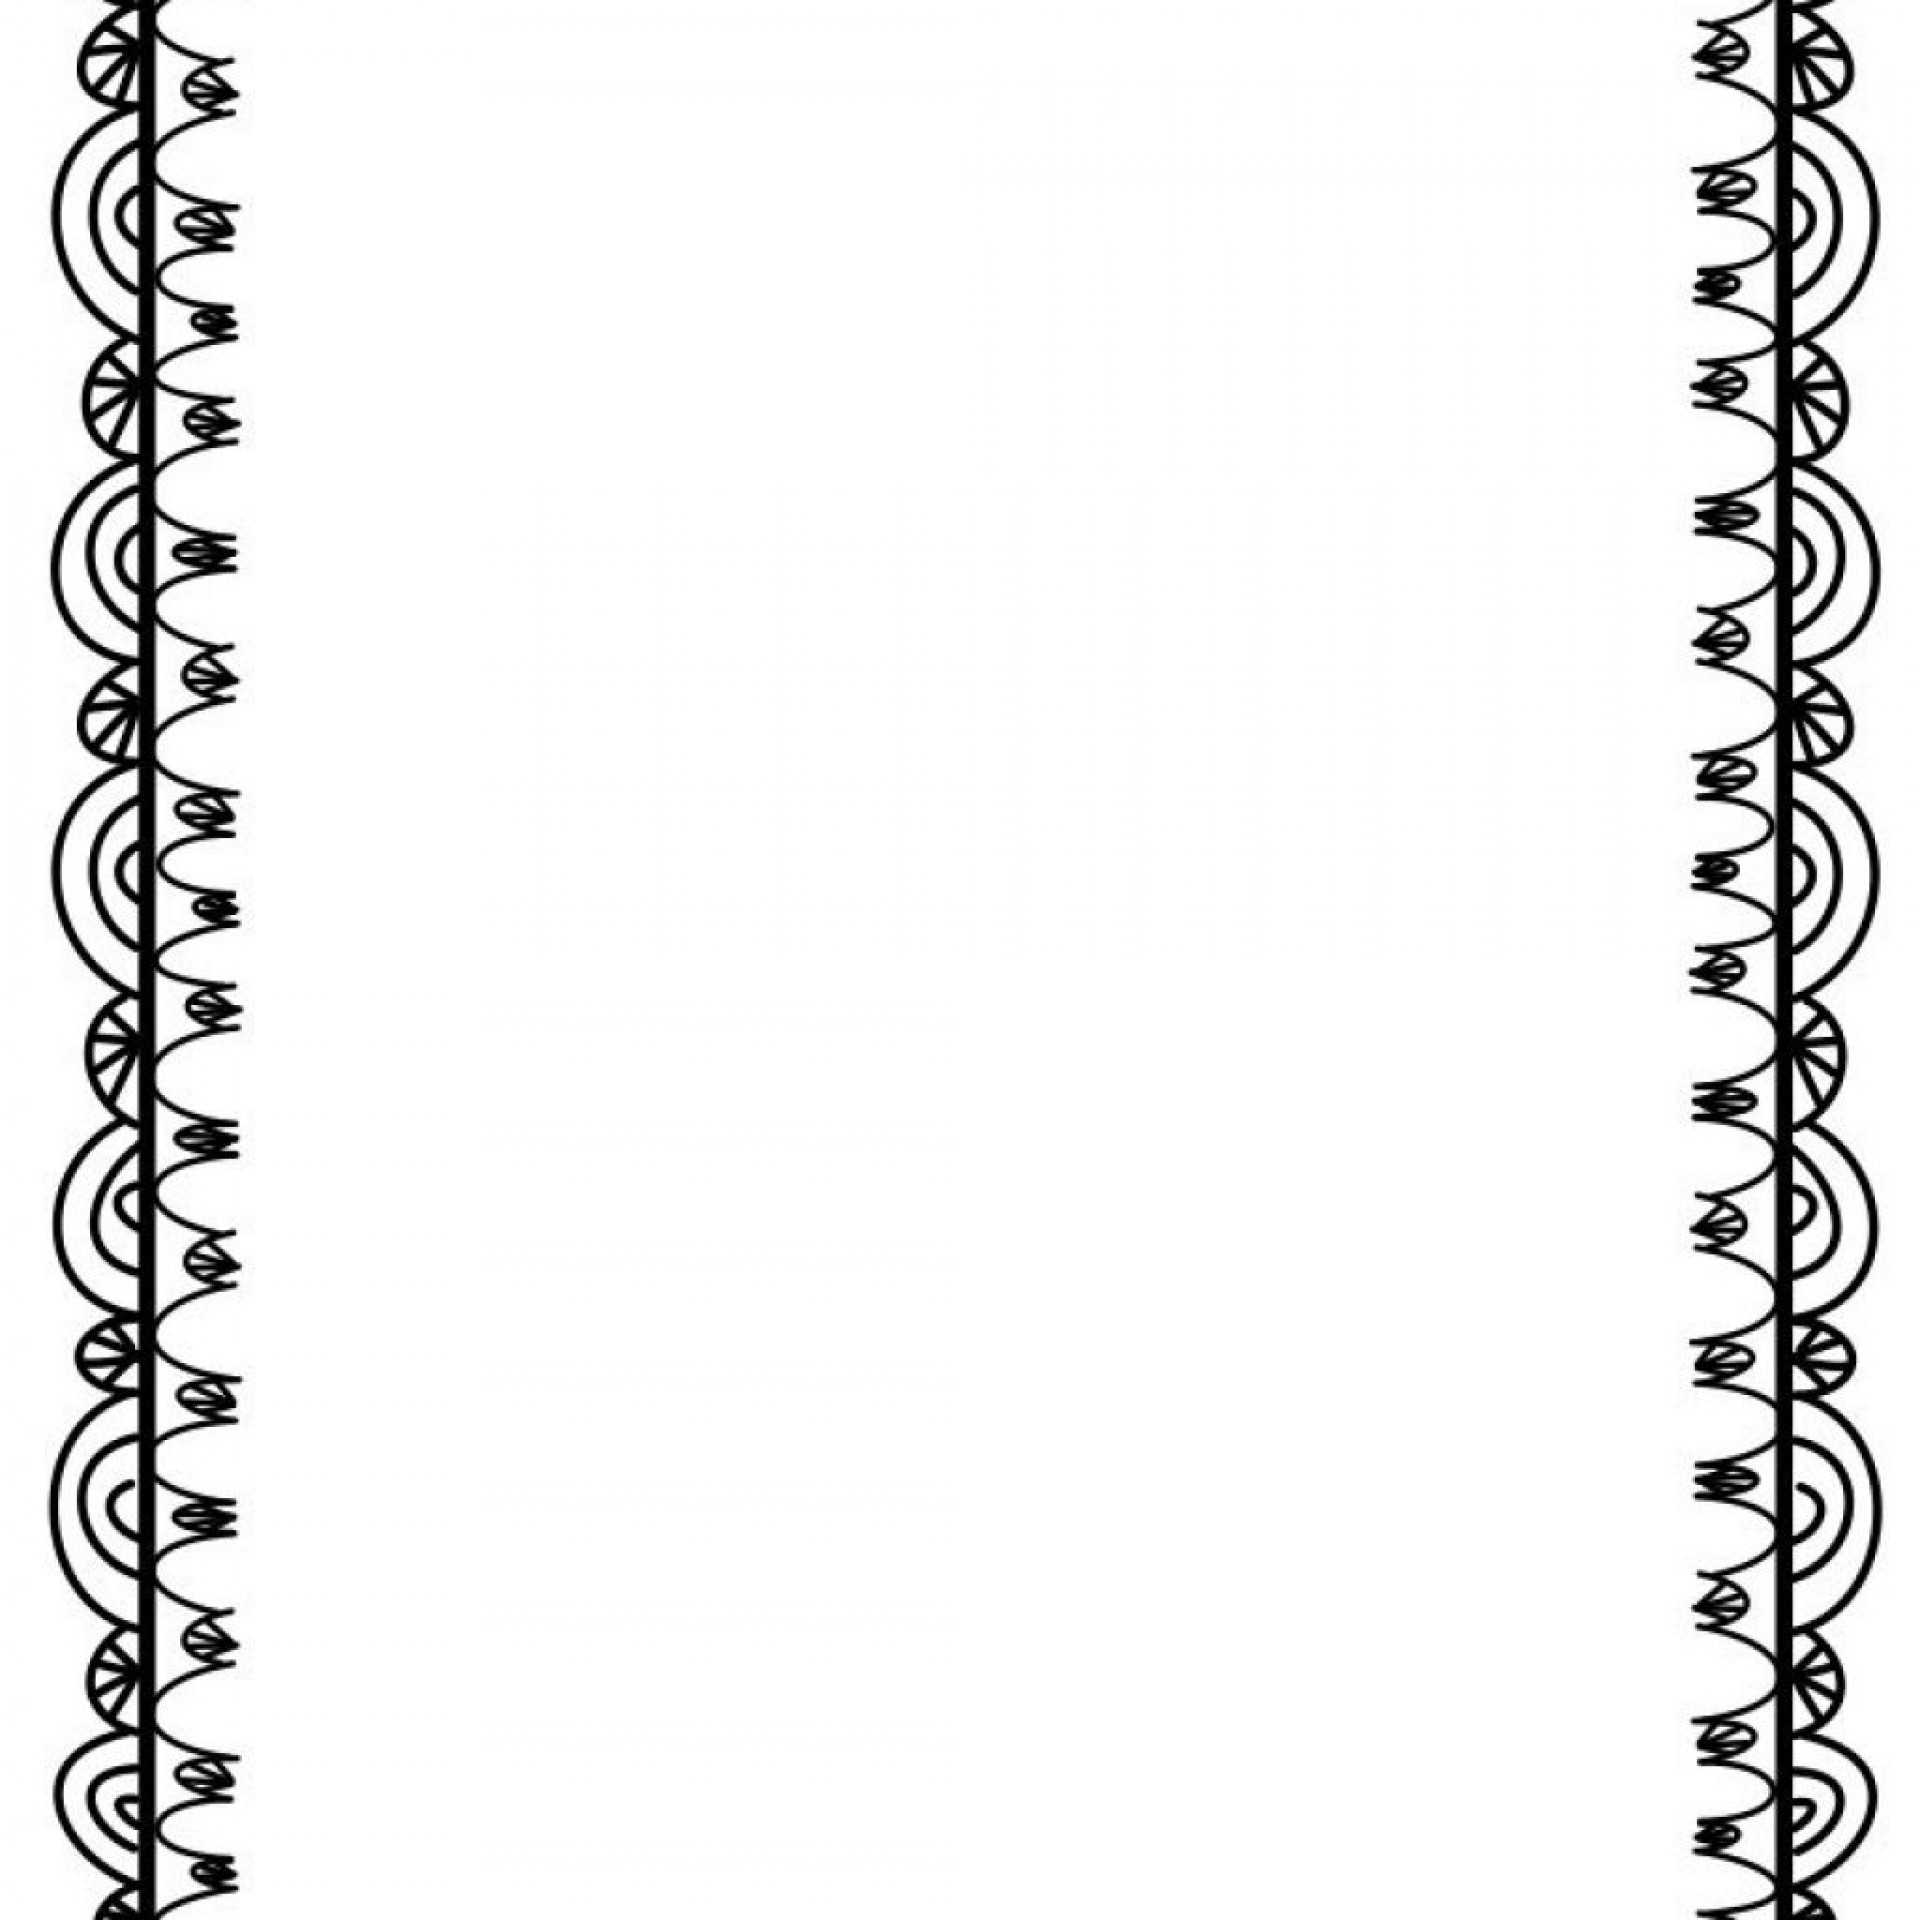 032 Template Ideas Christmas Borders Clip Art Download Ms With Regard To Word Border Templates Free Download